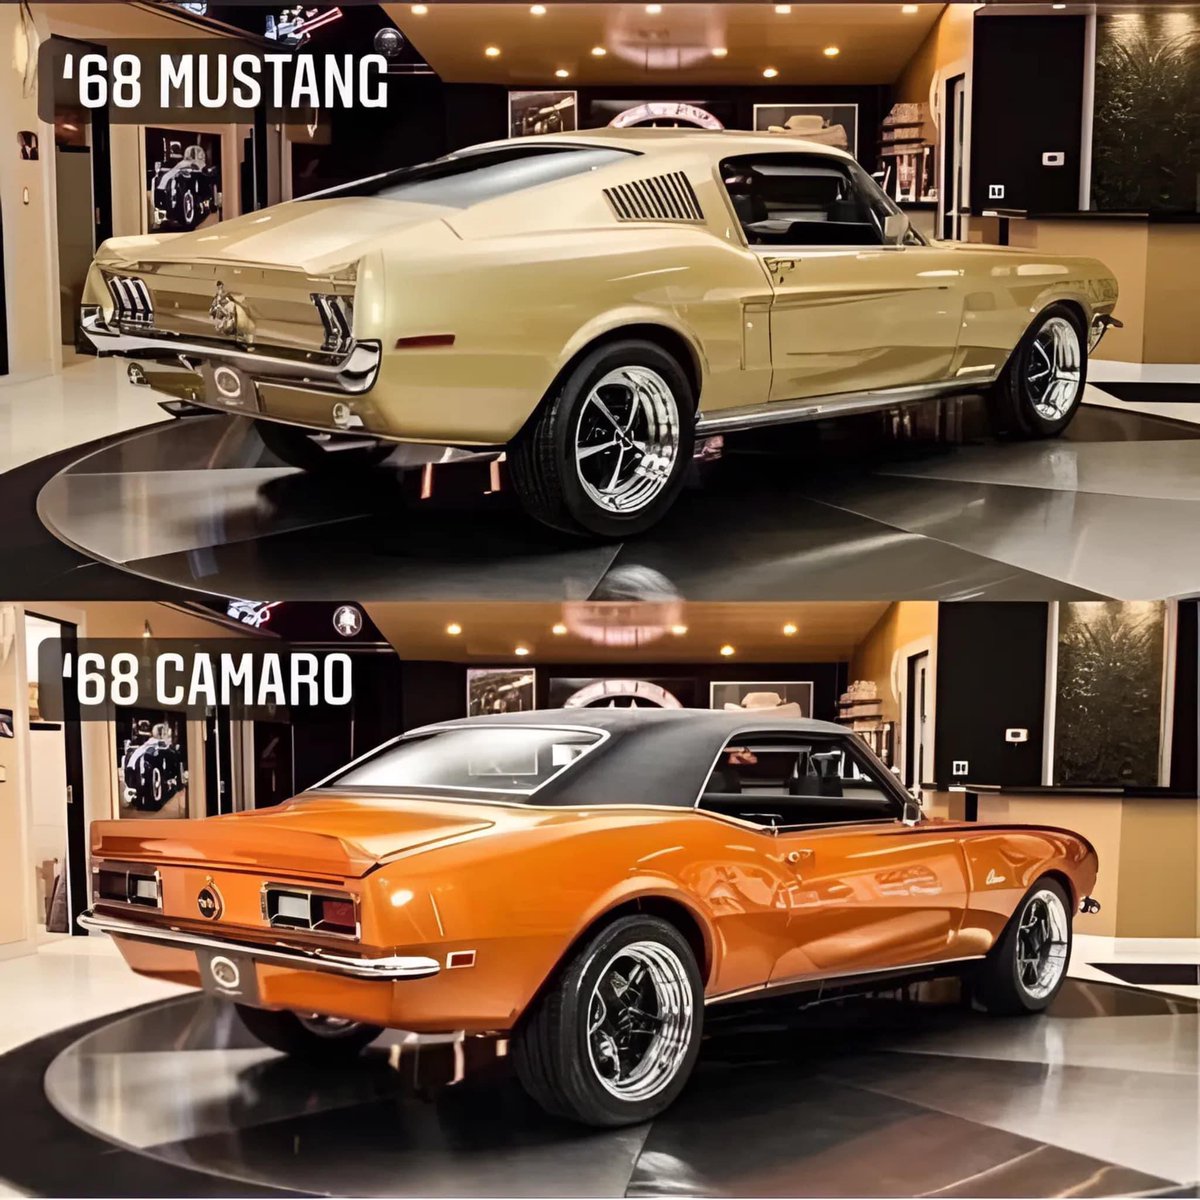 Without regard to the colors, which car would you prefer? A 1968 Mustang or a 1968 Camaro?